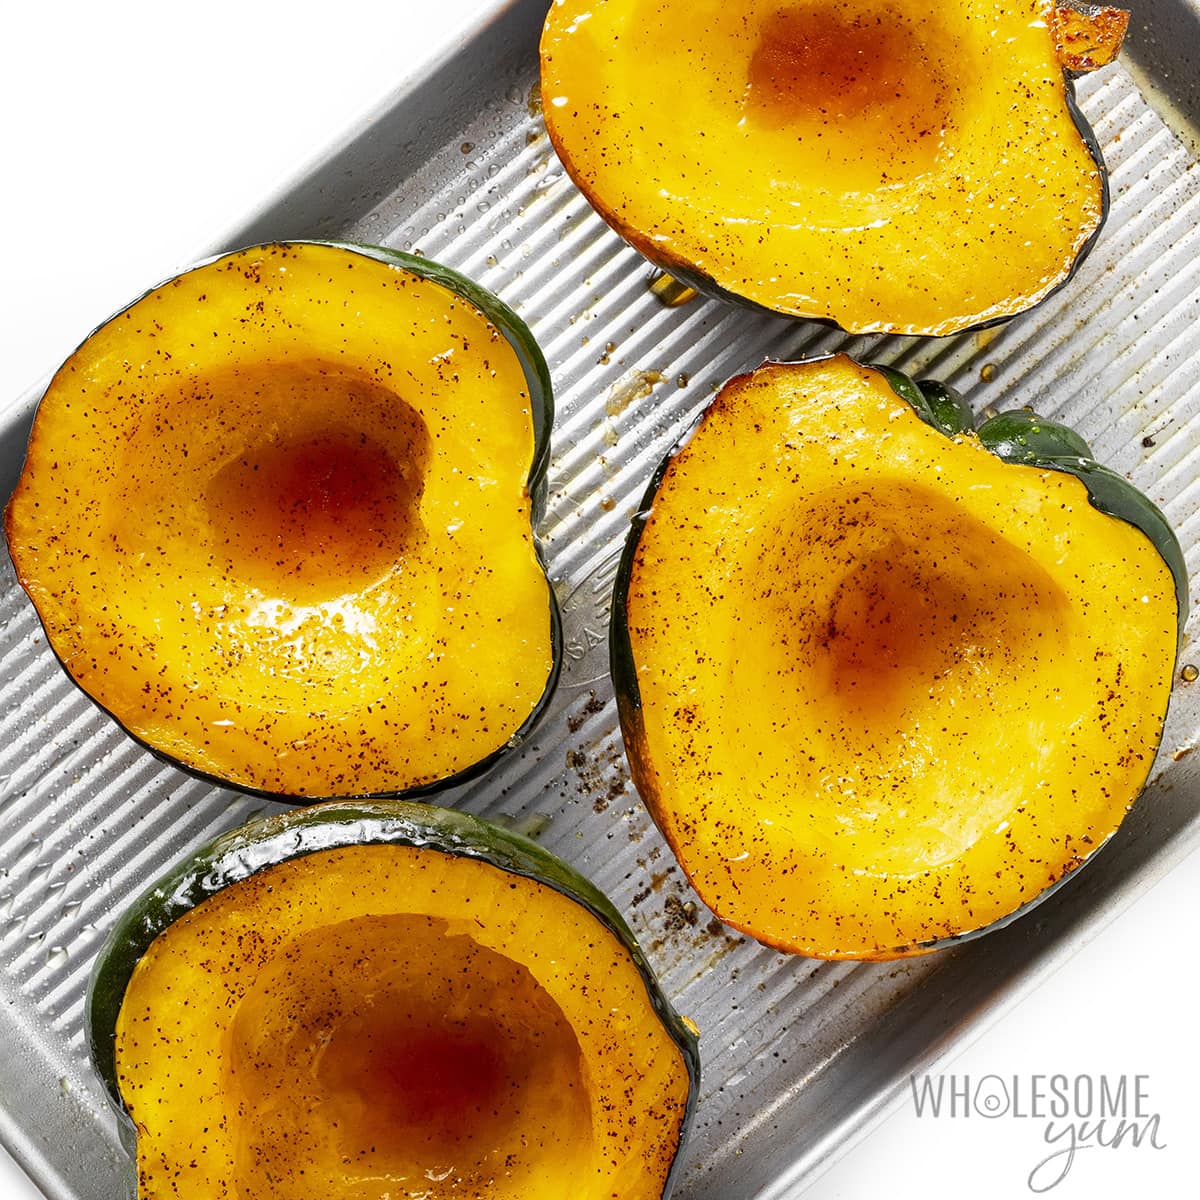 Squash drizzled with maple syrup and cut side up on a baking sheet.